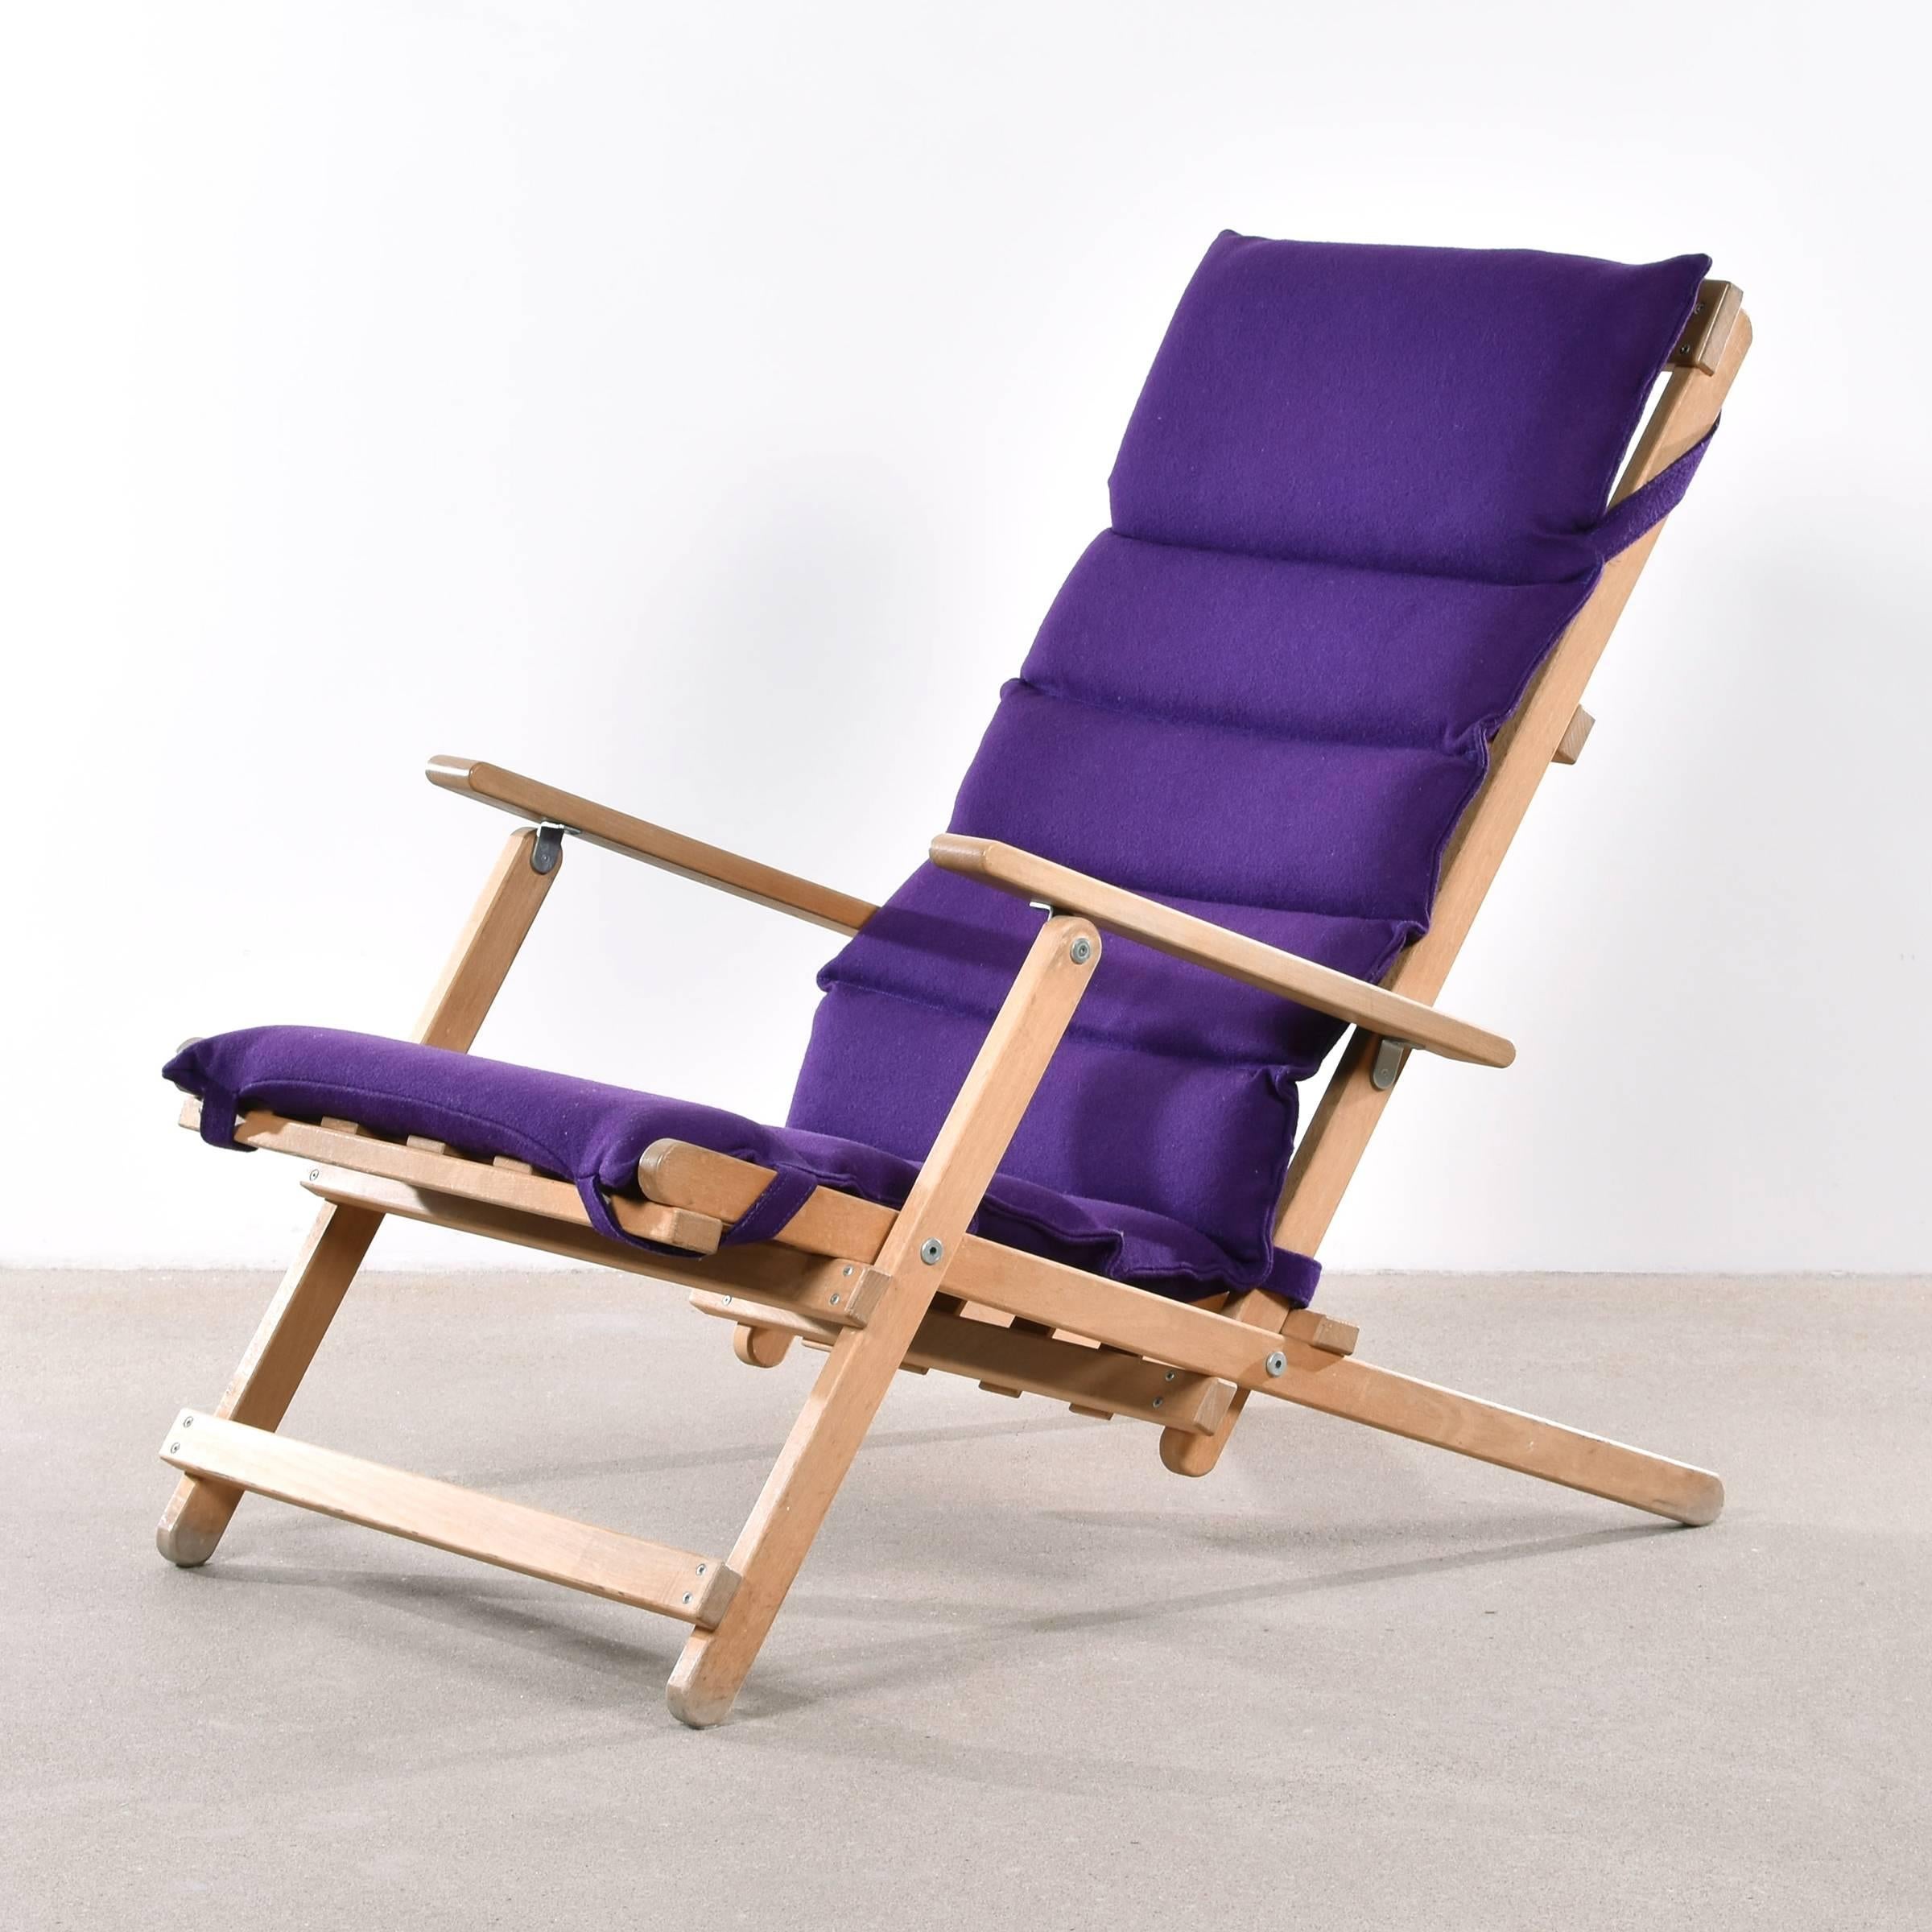 Foldable deck chair by Børge Mogensen for Søborg Møbelfabrik. Wooden frame with soft wool (felt) fabric. All in very good condition.